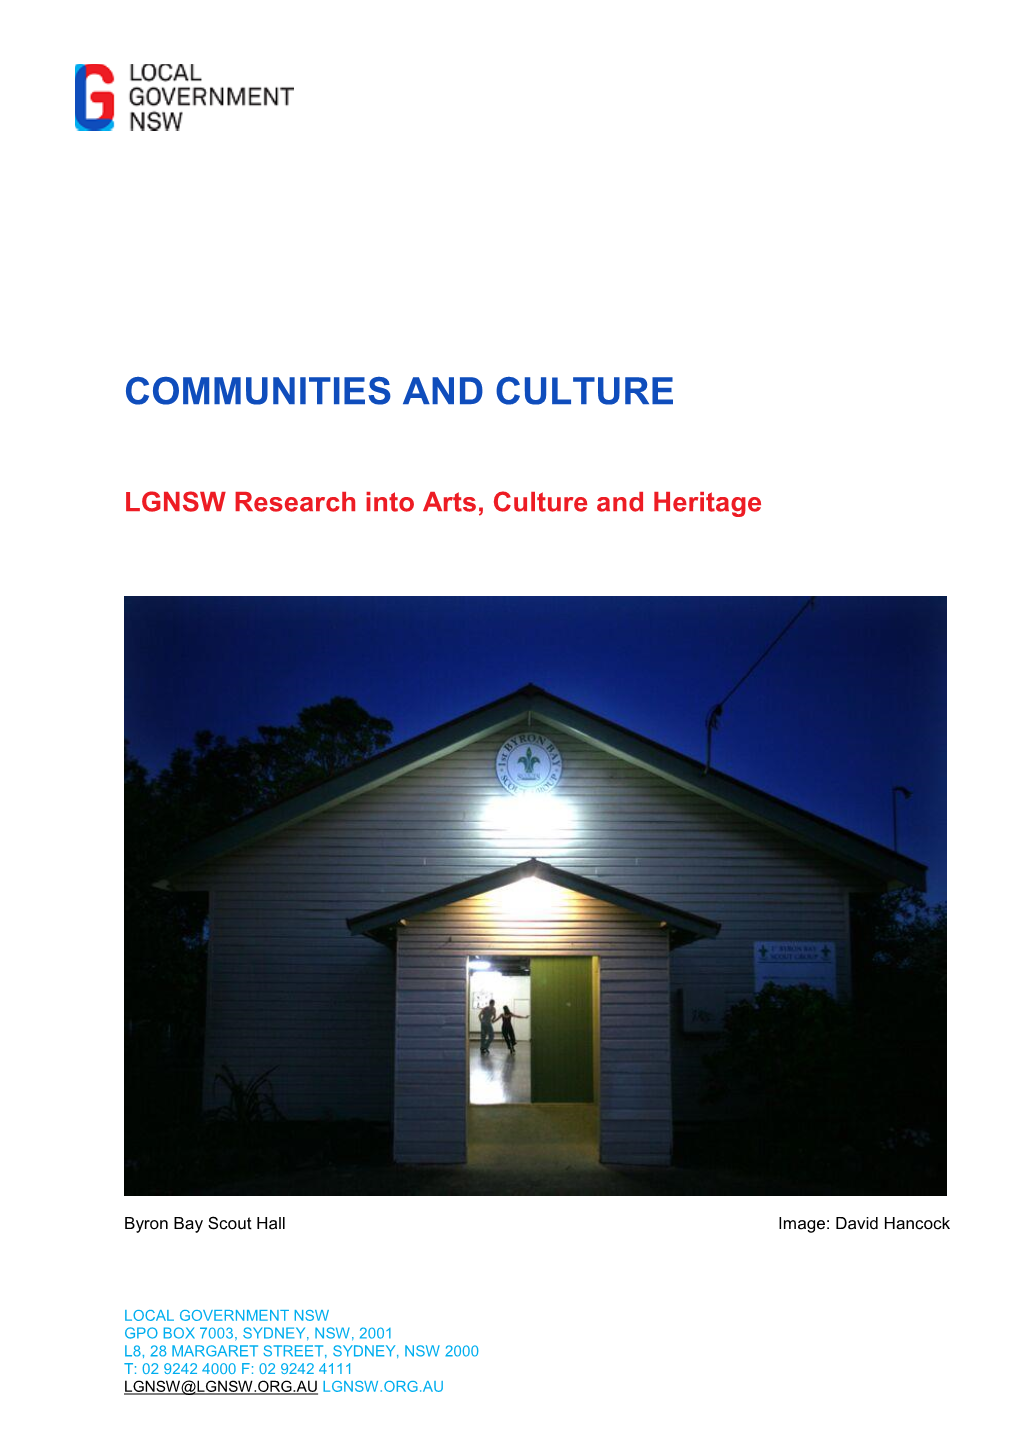 LGNSW Research Into Arts, Culture and Heritage